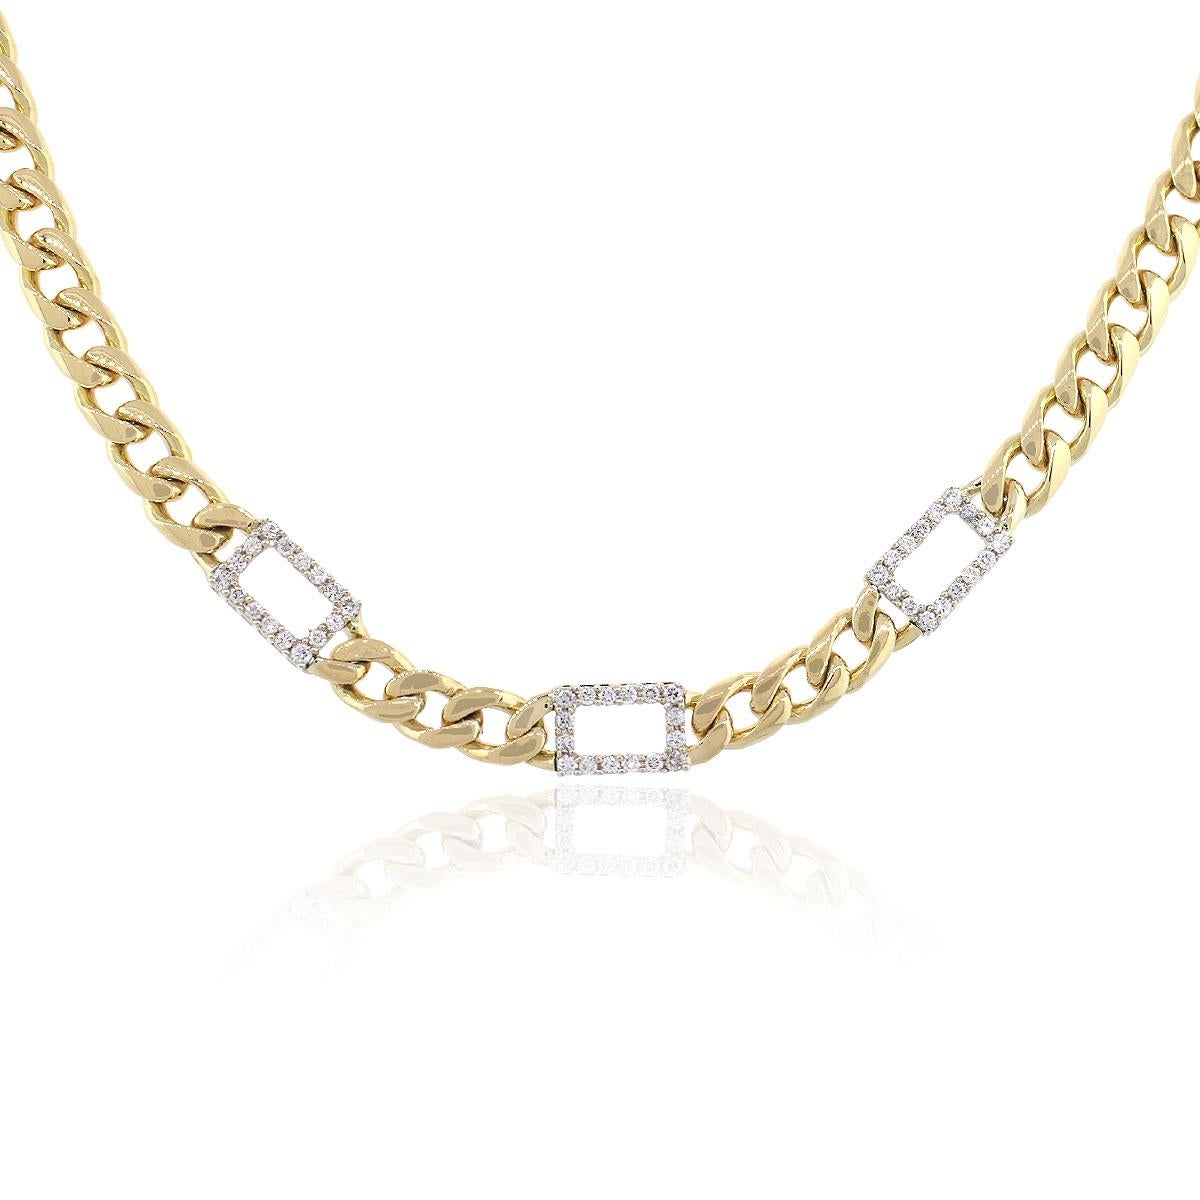 Material: 18k Yellow Gold
Diamond Details: Approx. 1.2ctw of round cut diamonds. Diamonds are G/H in color and VS in clarity
Measurements: Necklace measures 17″
Item Weight: 80.5g (51.8dwt)
SKU: G8696